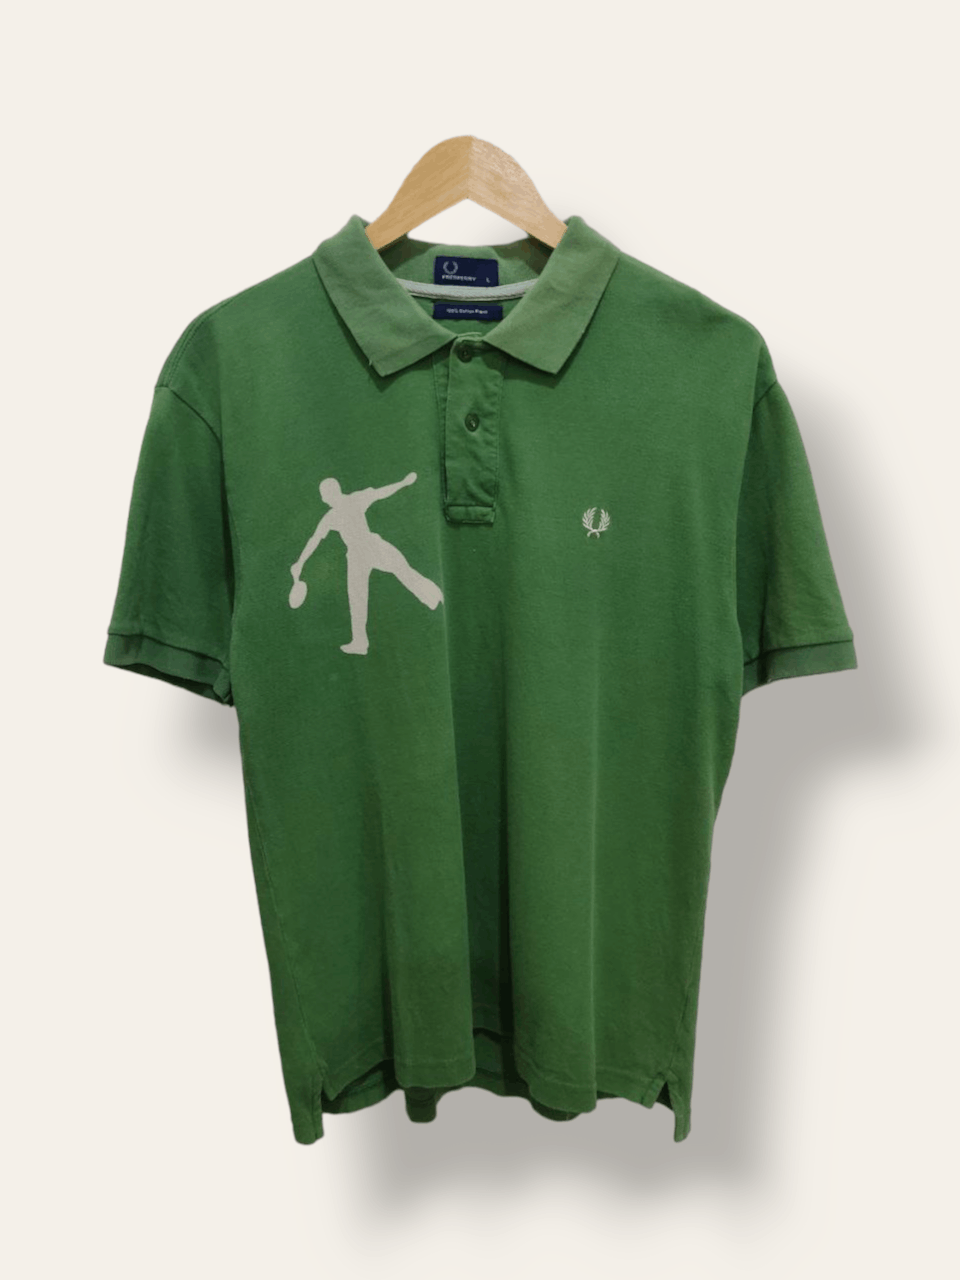 Vintage Fred Perry Tennis Big Graphic Polo Tees - 1